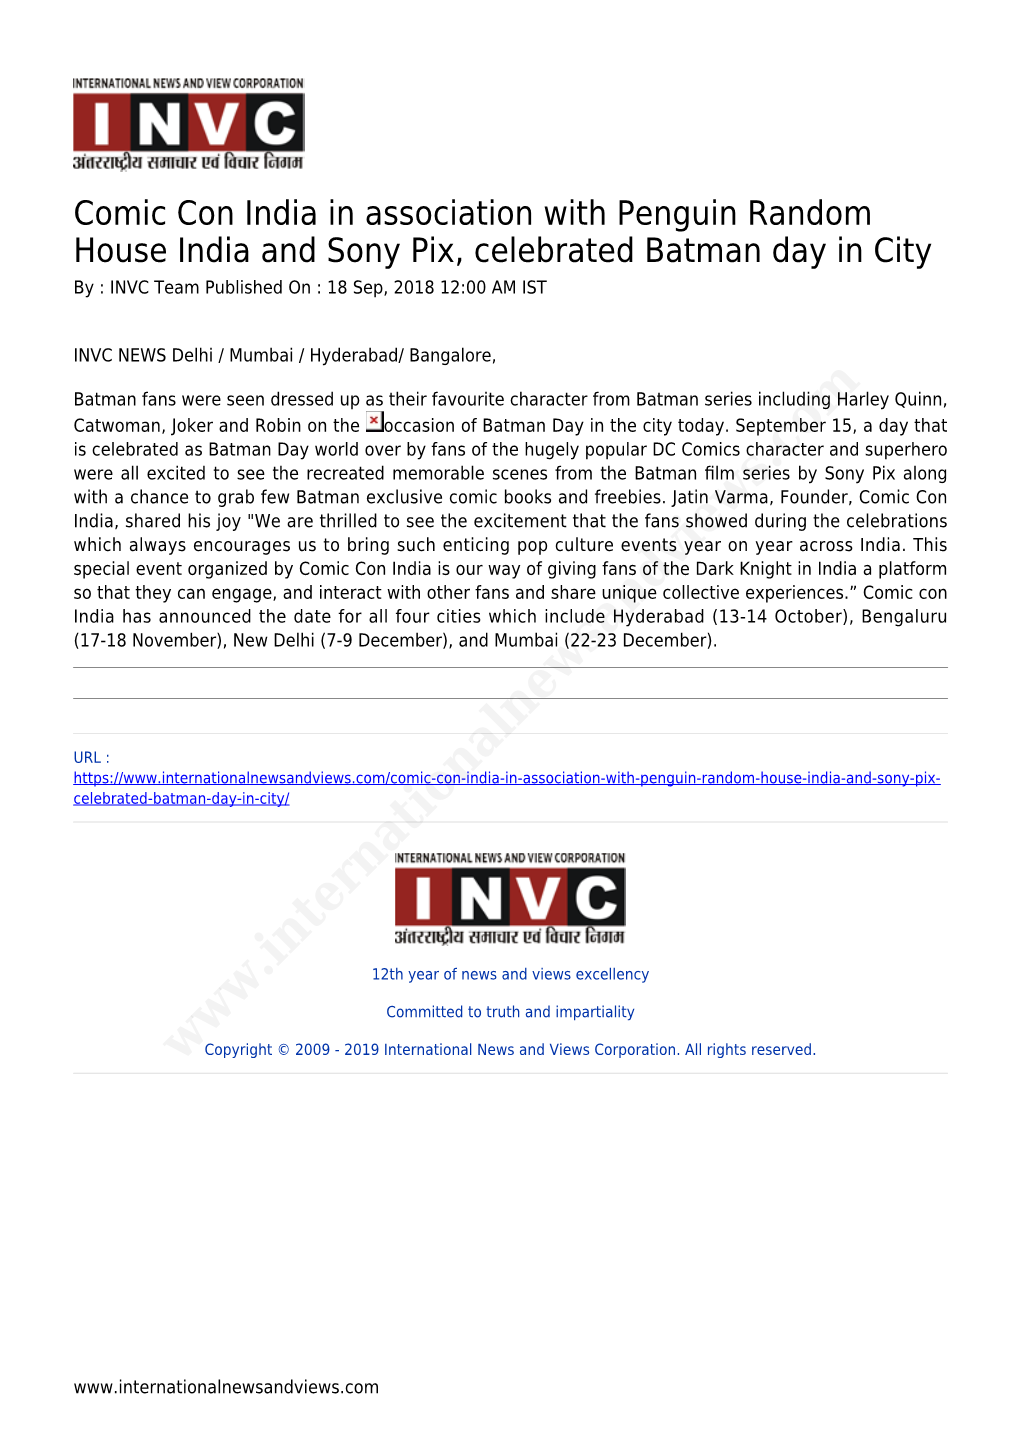 Comic Con India in Association with Penguin Random House India and Sony Pix, Celebrated Batman Day in City by : INVC Team Published on : 18 Sep, 2018 12:00 AM IST